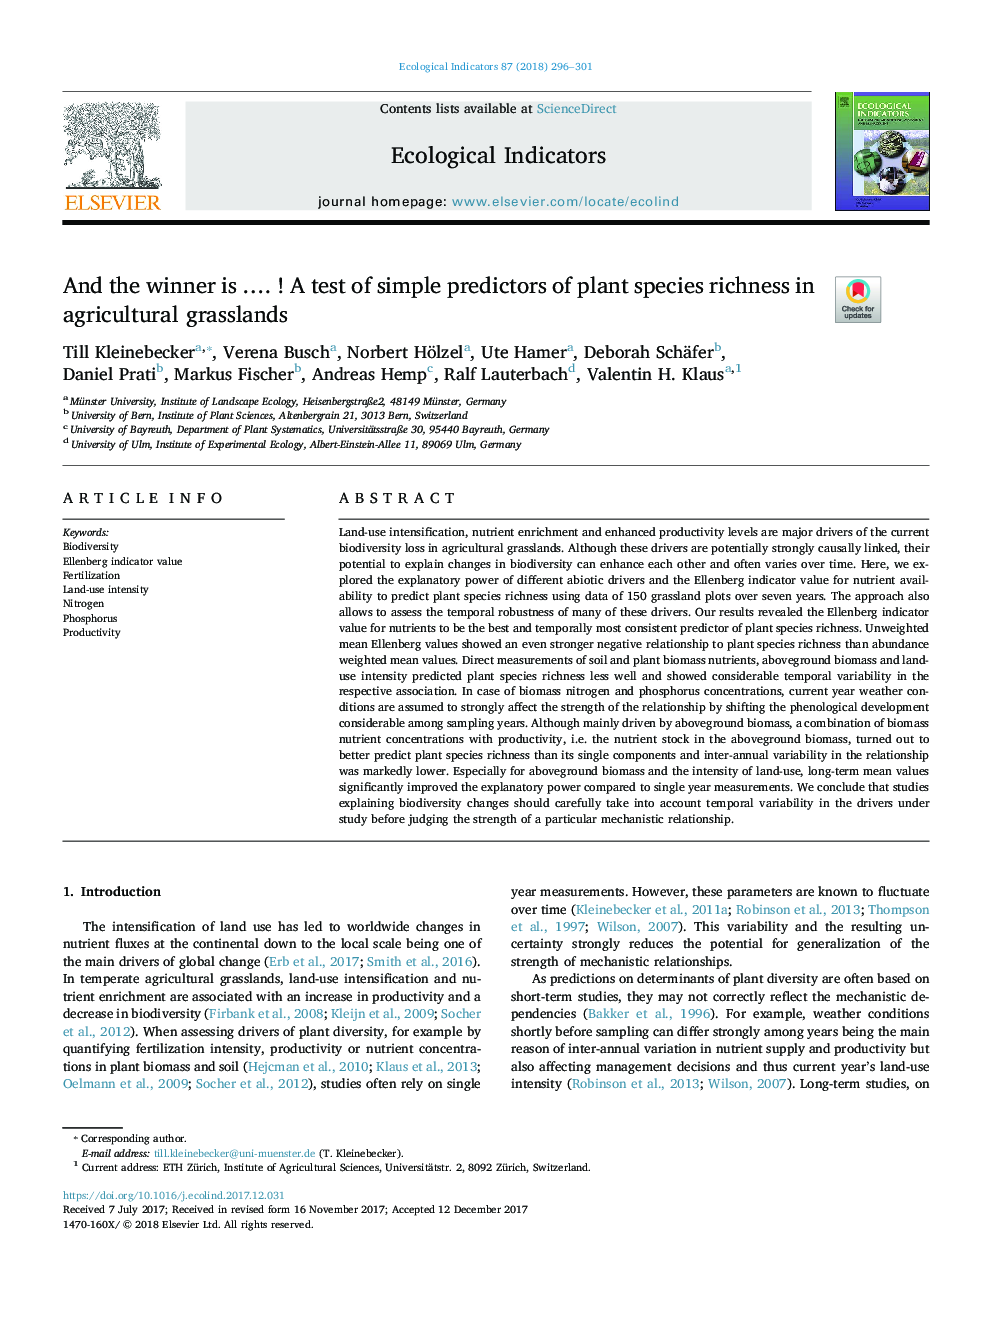 And the winner is â¦. ! A test of simple predictors of plant species richness in agricultural grasslands